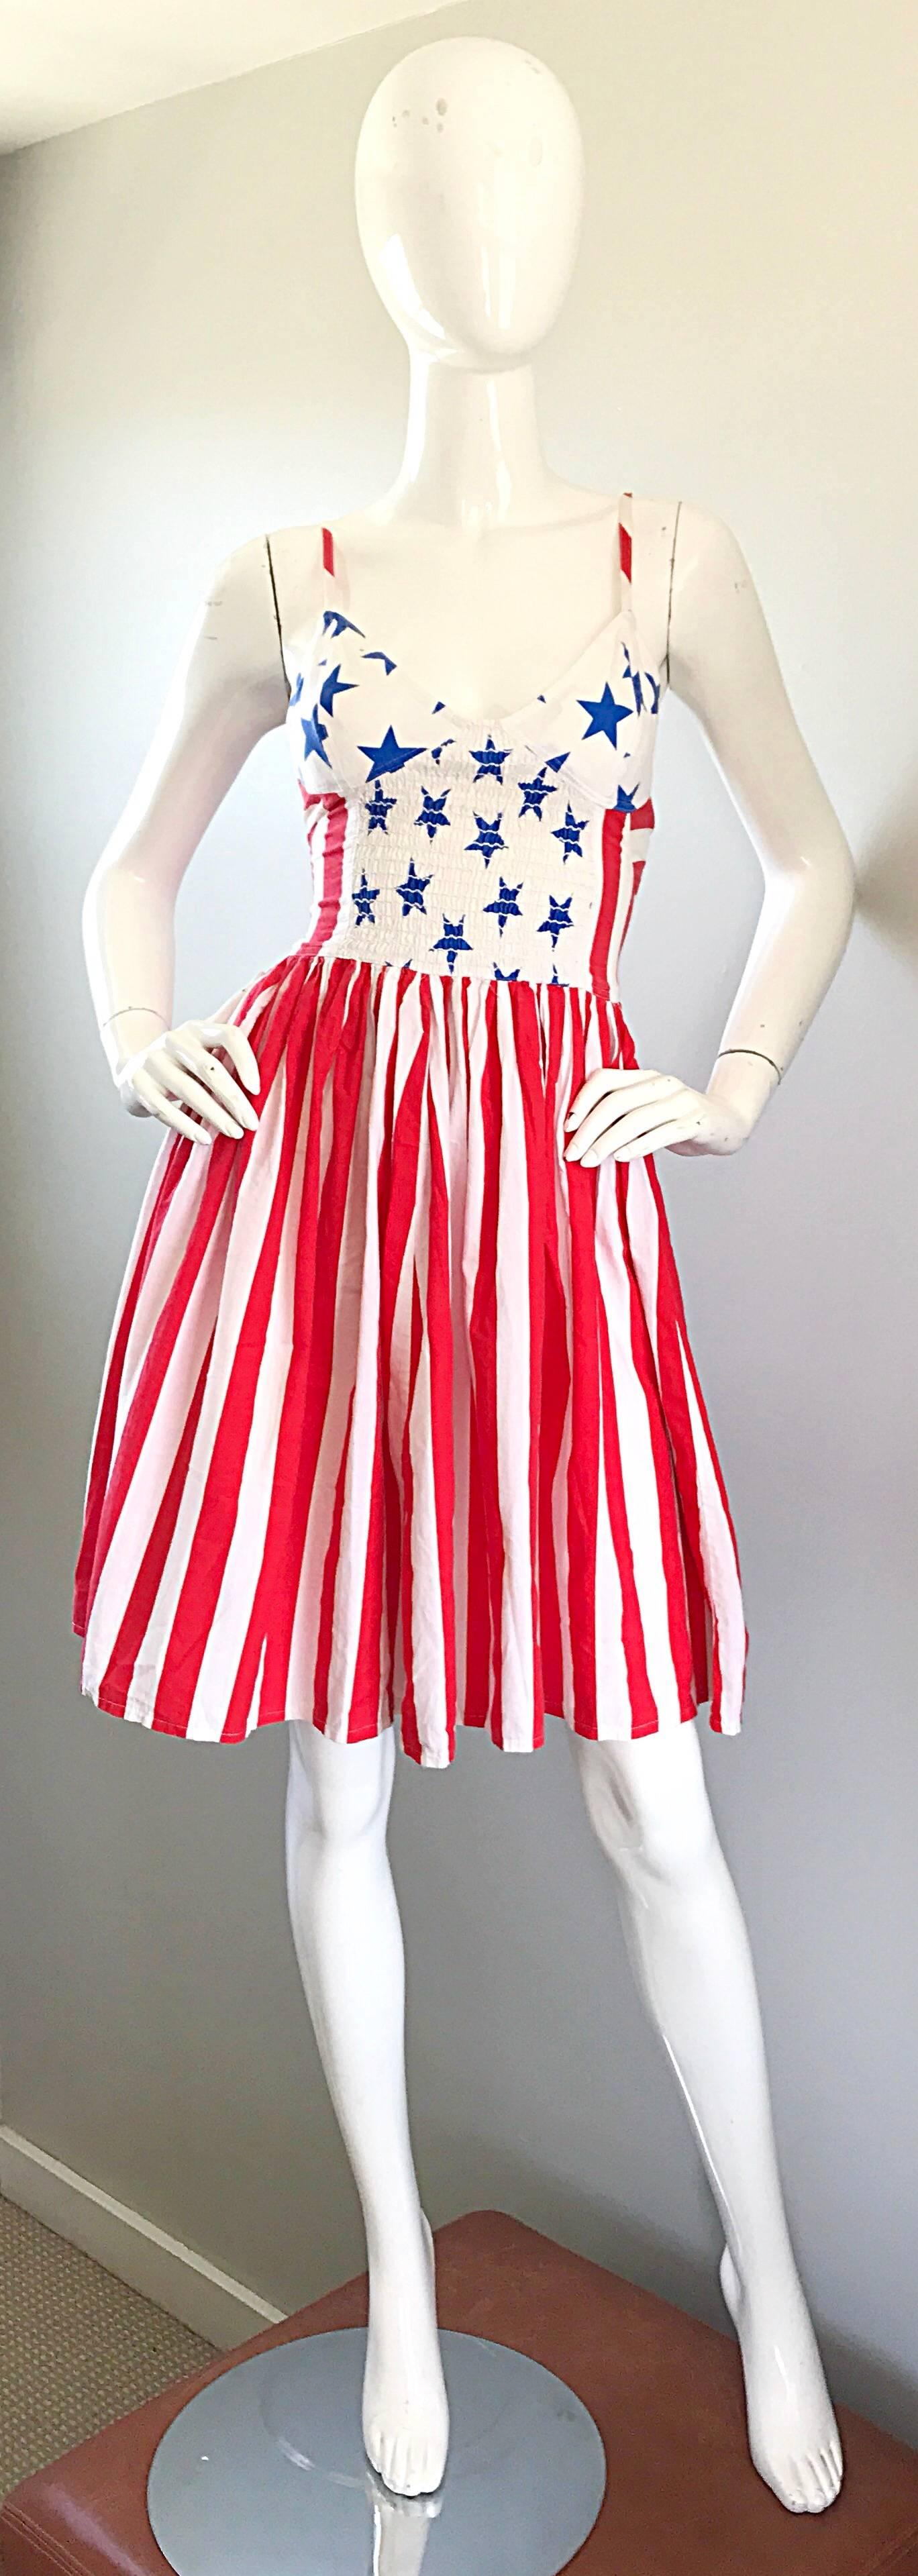 Extremely rare Documented vintage BOY LONDON 'American Flag' dress! My heart literally skipped three beats when I found this rare beauty! I have never been fortunate enough to find an old Boy London piece until now! Whimsical American Flag print on